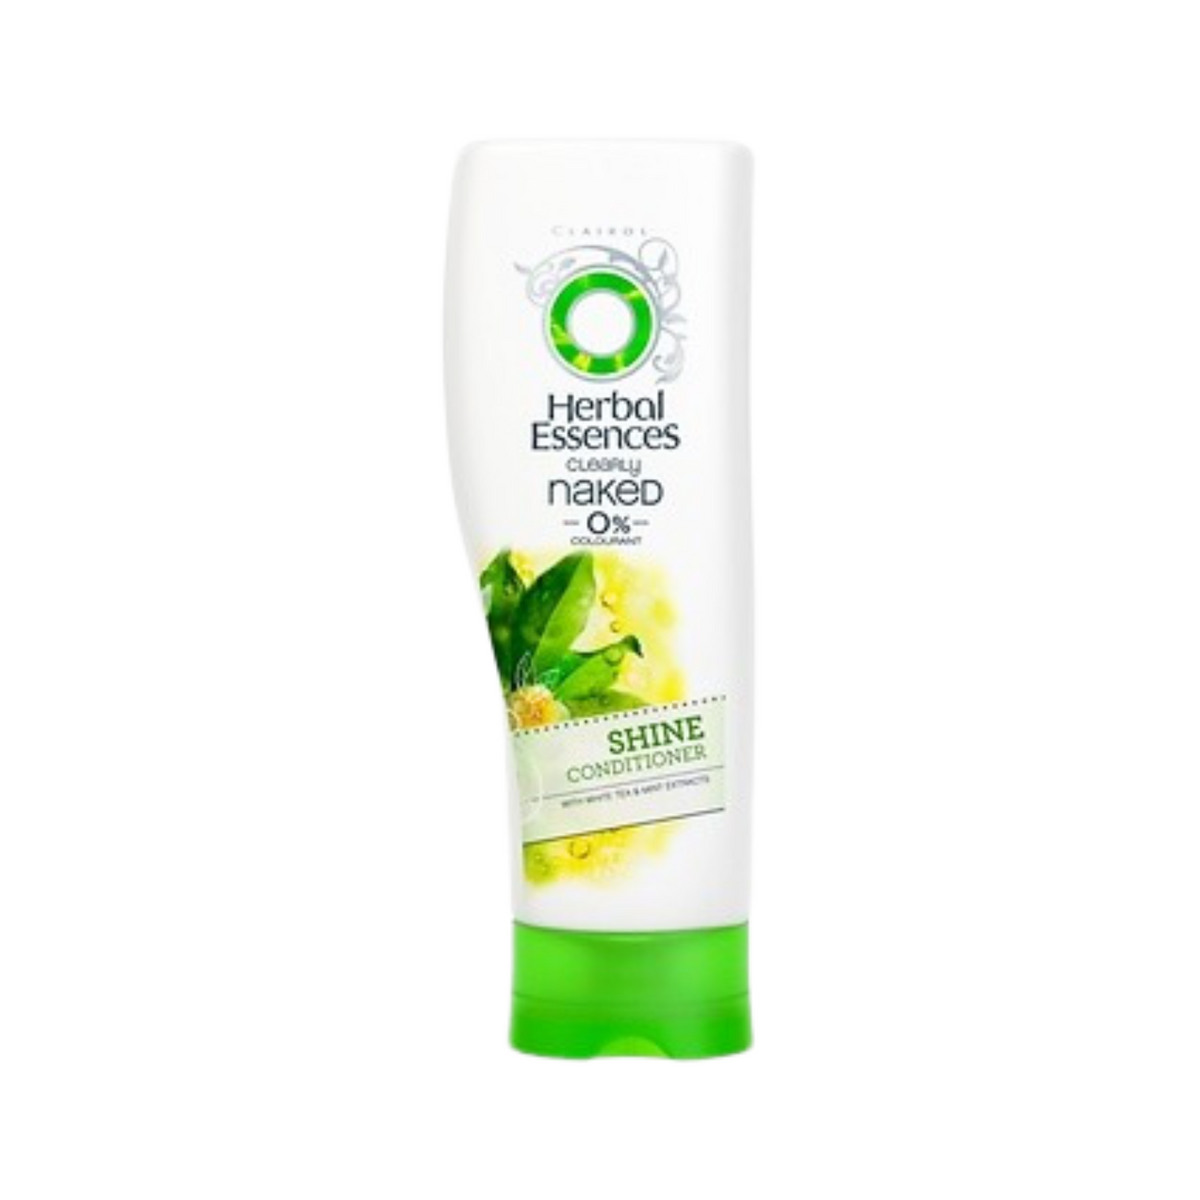 herbal-essences-clearly-naked-0-colourants-shine-conditioner-400ml